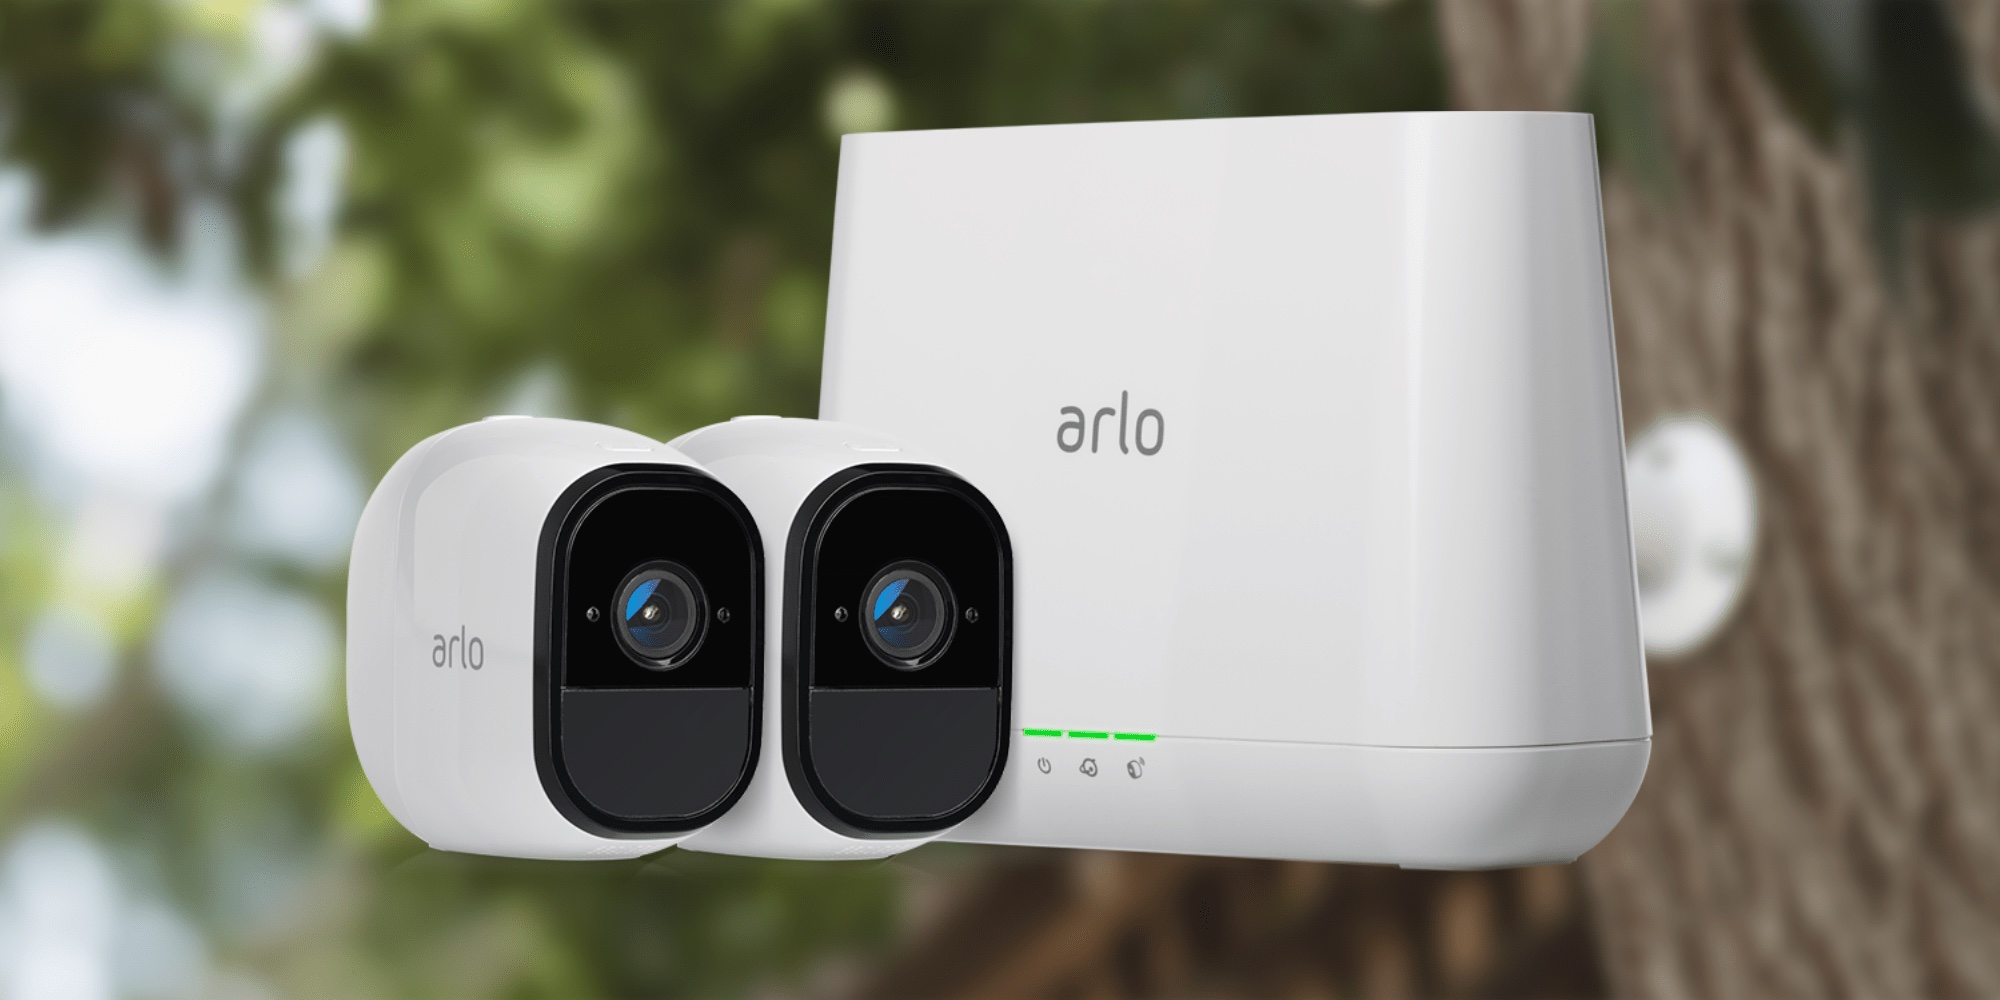 Score Arlo's Pro 2 TwoCamera System at a new alltime low of 271 (60 off) 9to5Toys